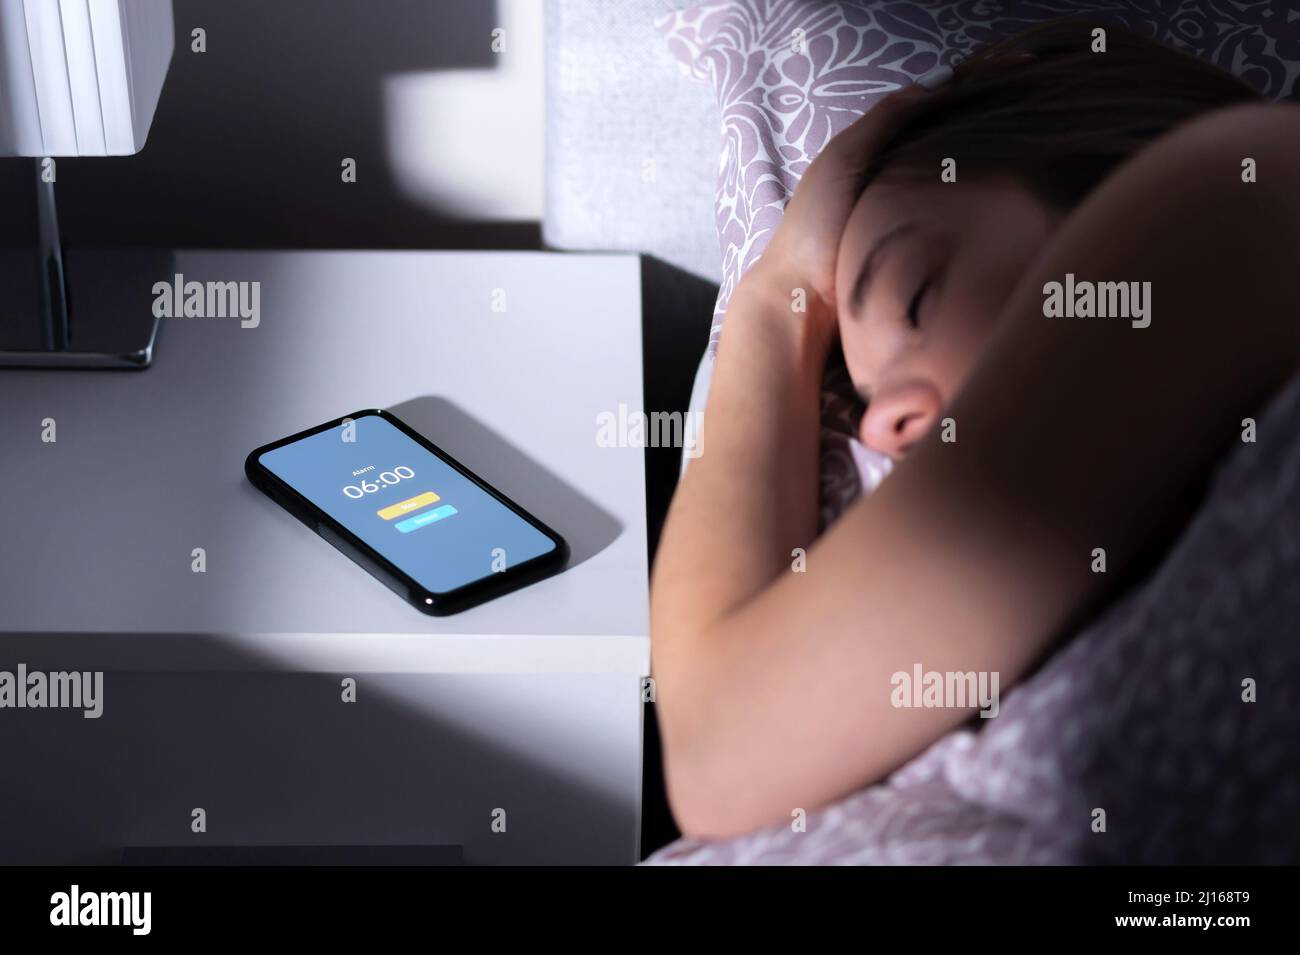 Phone alarm waking up tired sleeping woman in bed at night or morning. Cellphone on table with clock timer and snooze button. Oversleeping person. Stock Photo